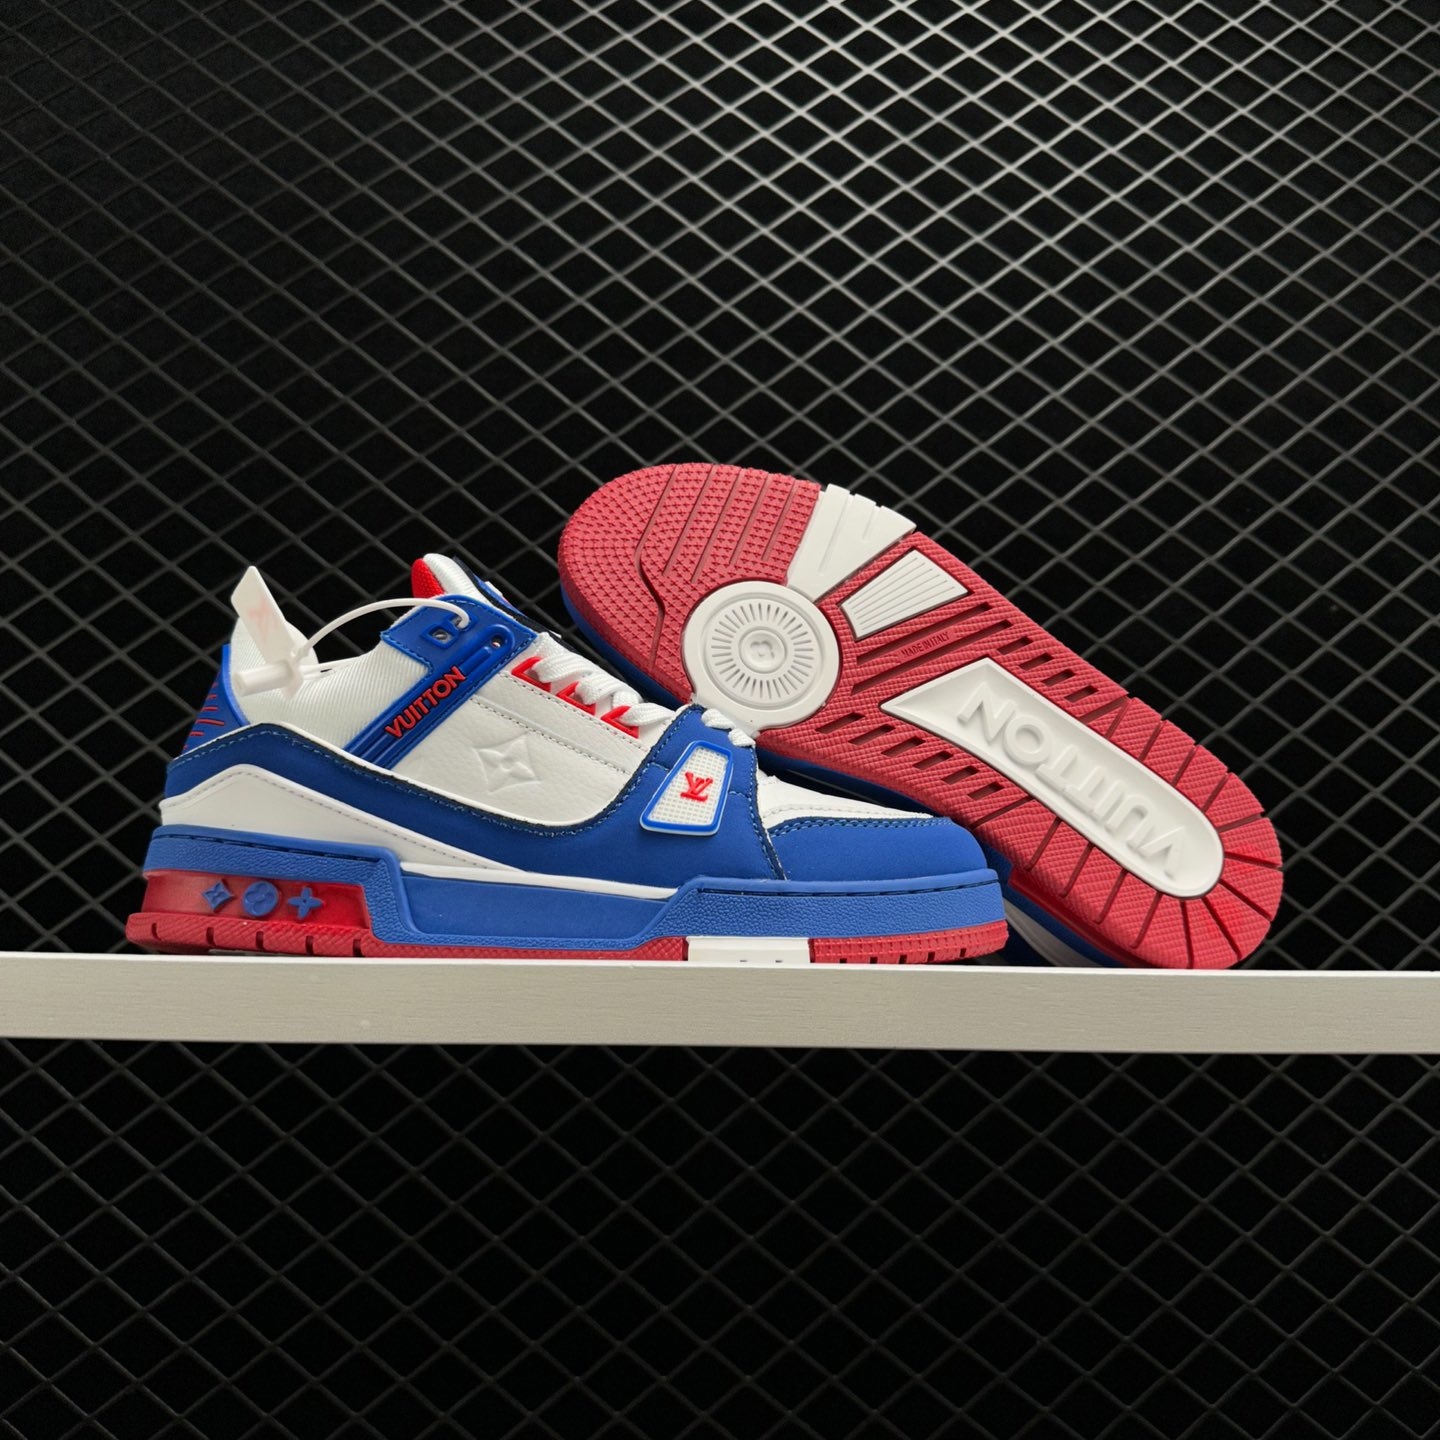 Louis Vuitton Trainer Sneaker 'White Blue Red' 1A8ZSY - Premium Footwear with Iconic Design